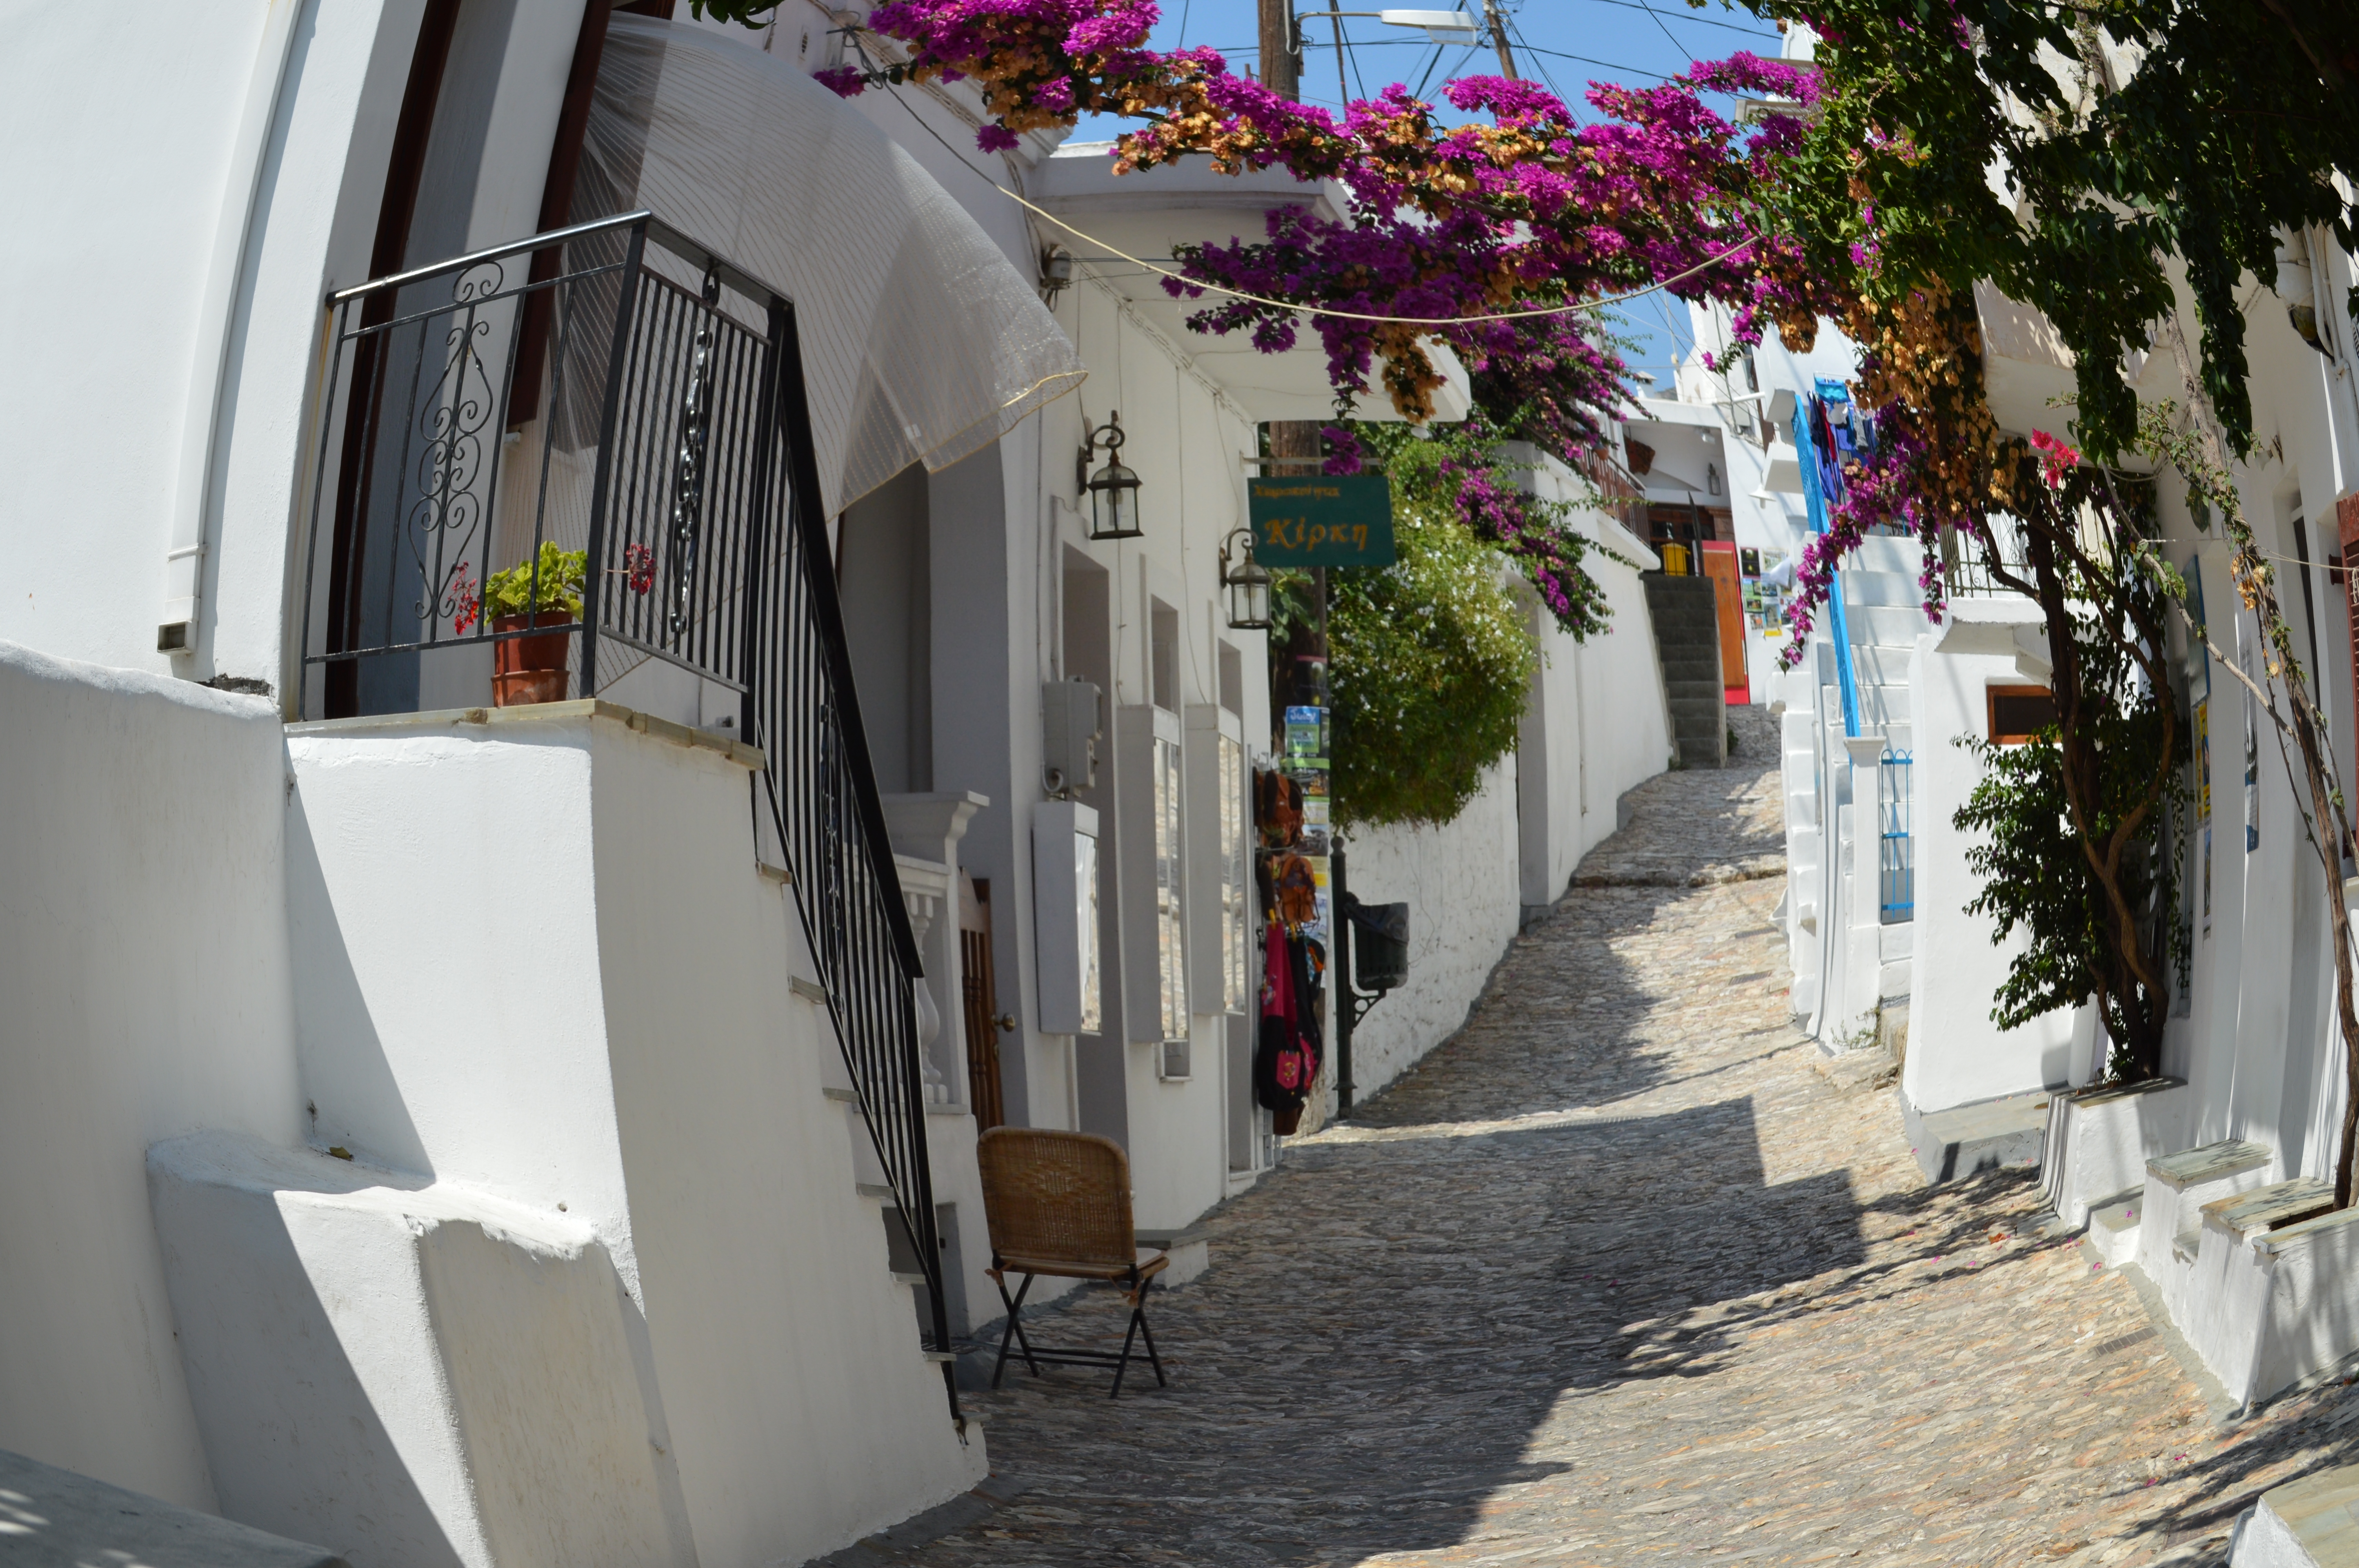 Skyros town by orma77